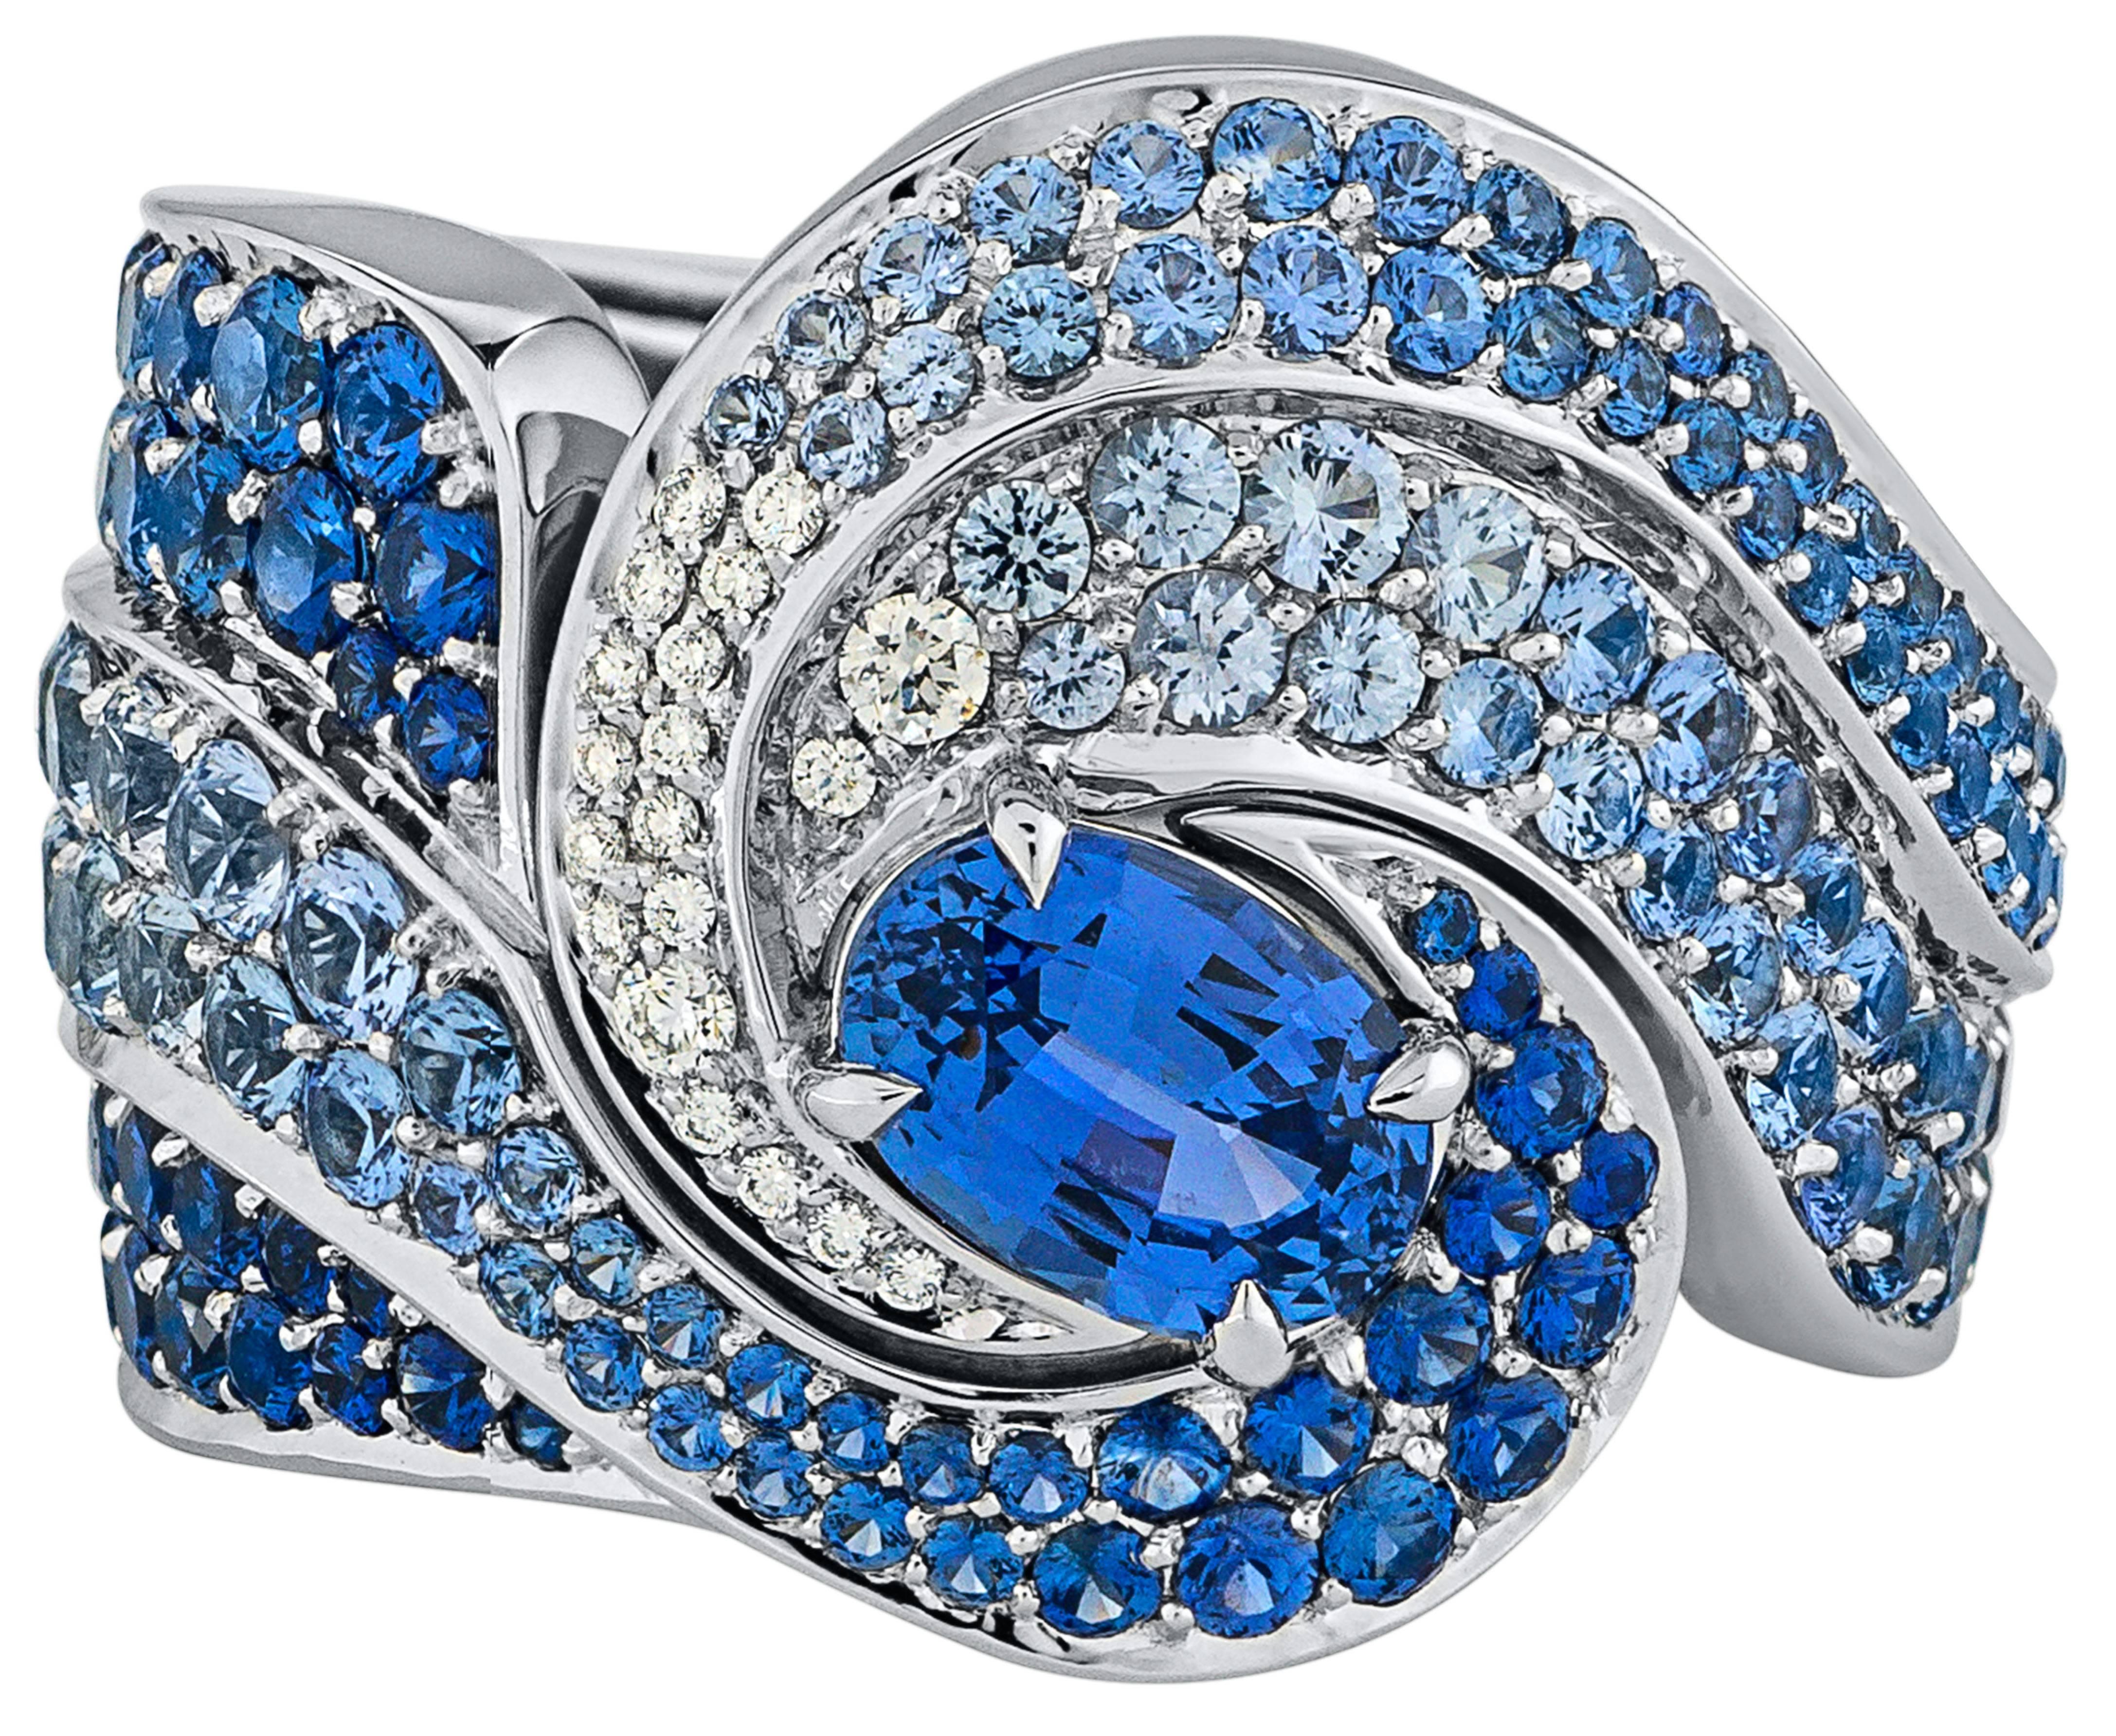 Ring crafted in 18K ring                                                                    Round brilliant diamond: x32 pieces = 0.12 carats                                               Blue sapphires: x262 pieces = 5.80 carats                    